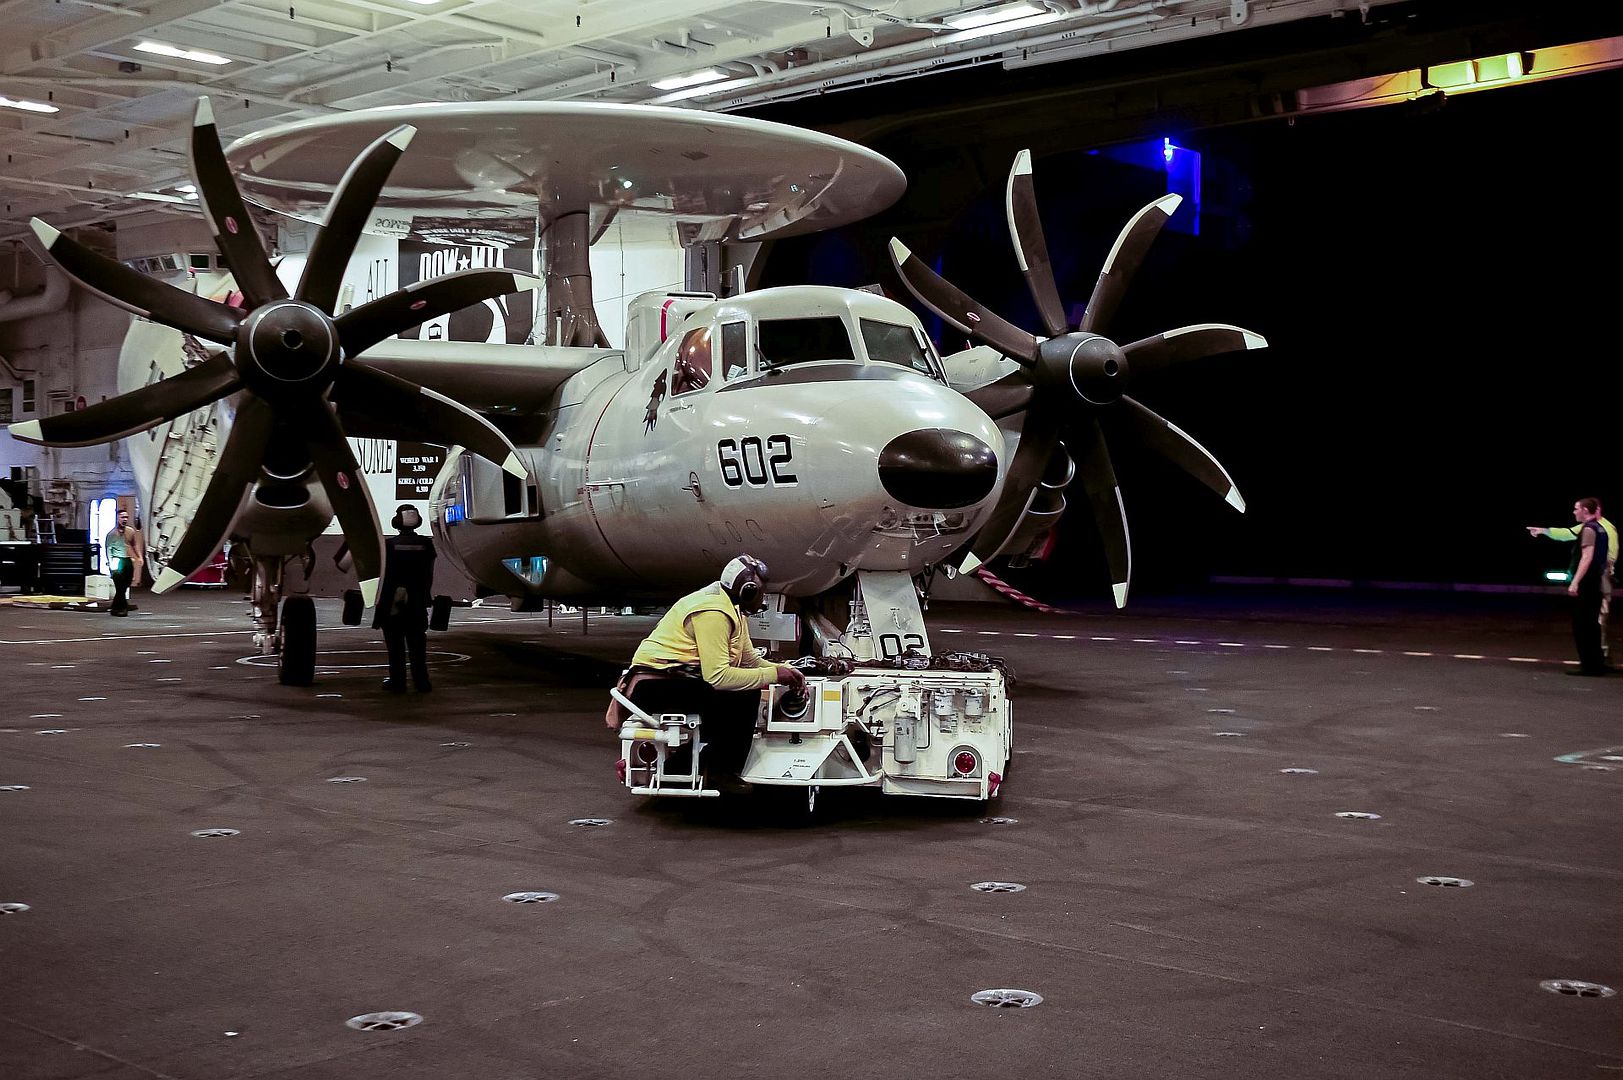 2D Advanced Hawkeye Assigned To The Black Eagles Of Carrier Airborne Early Warning Squadron 113 In The Hangar Bay Of The Aircraft Carrier USS Carl Vinson